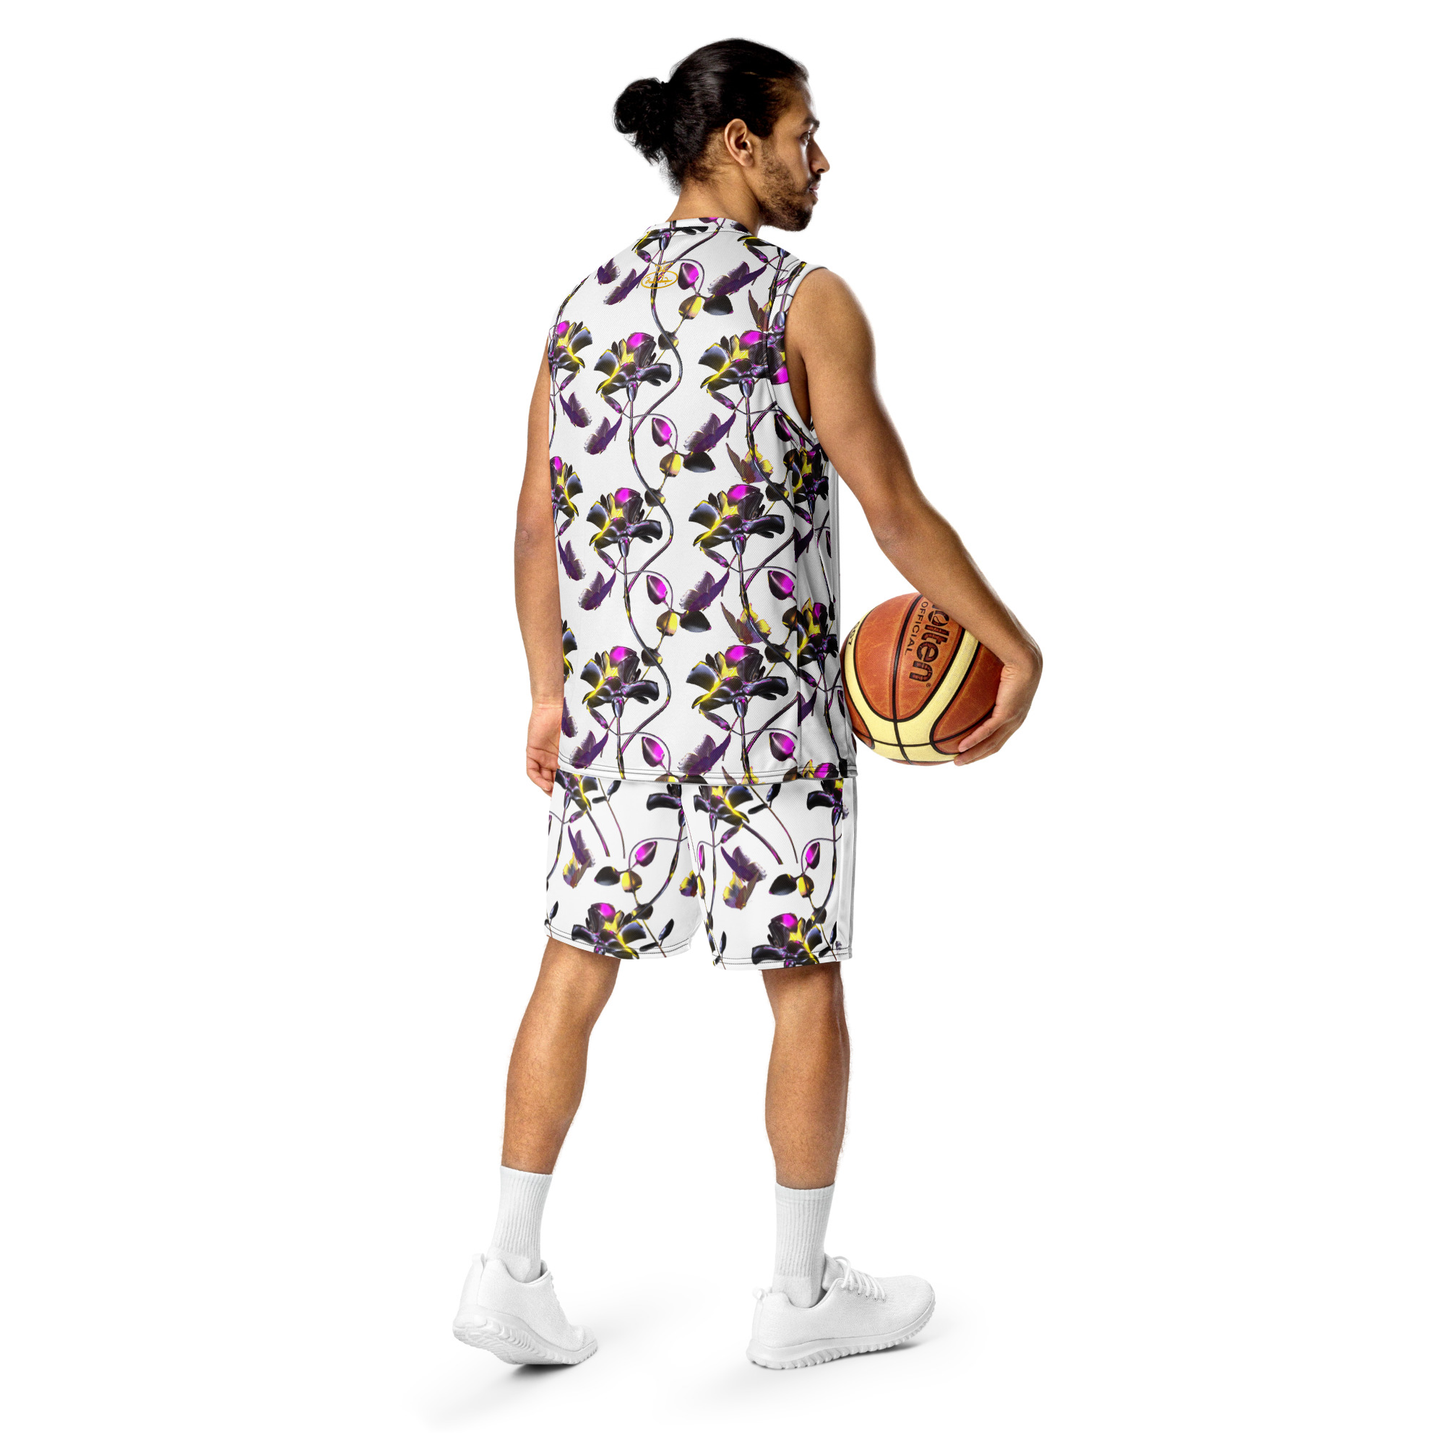 UNISEX BASKETBALL RECYCLED JERSEY